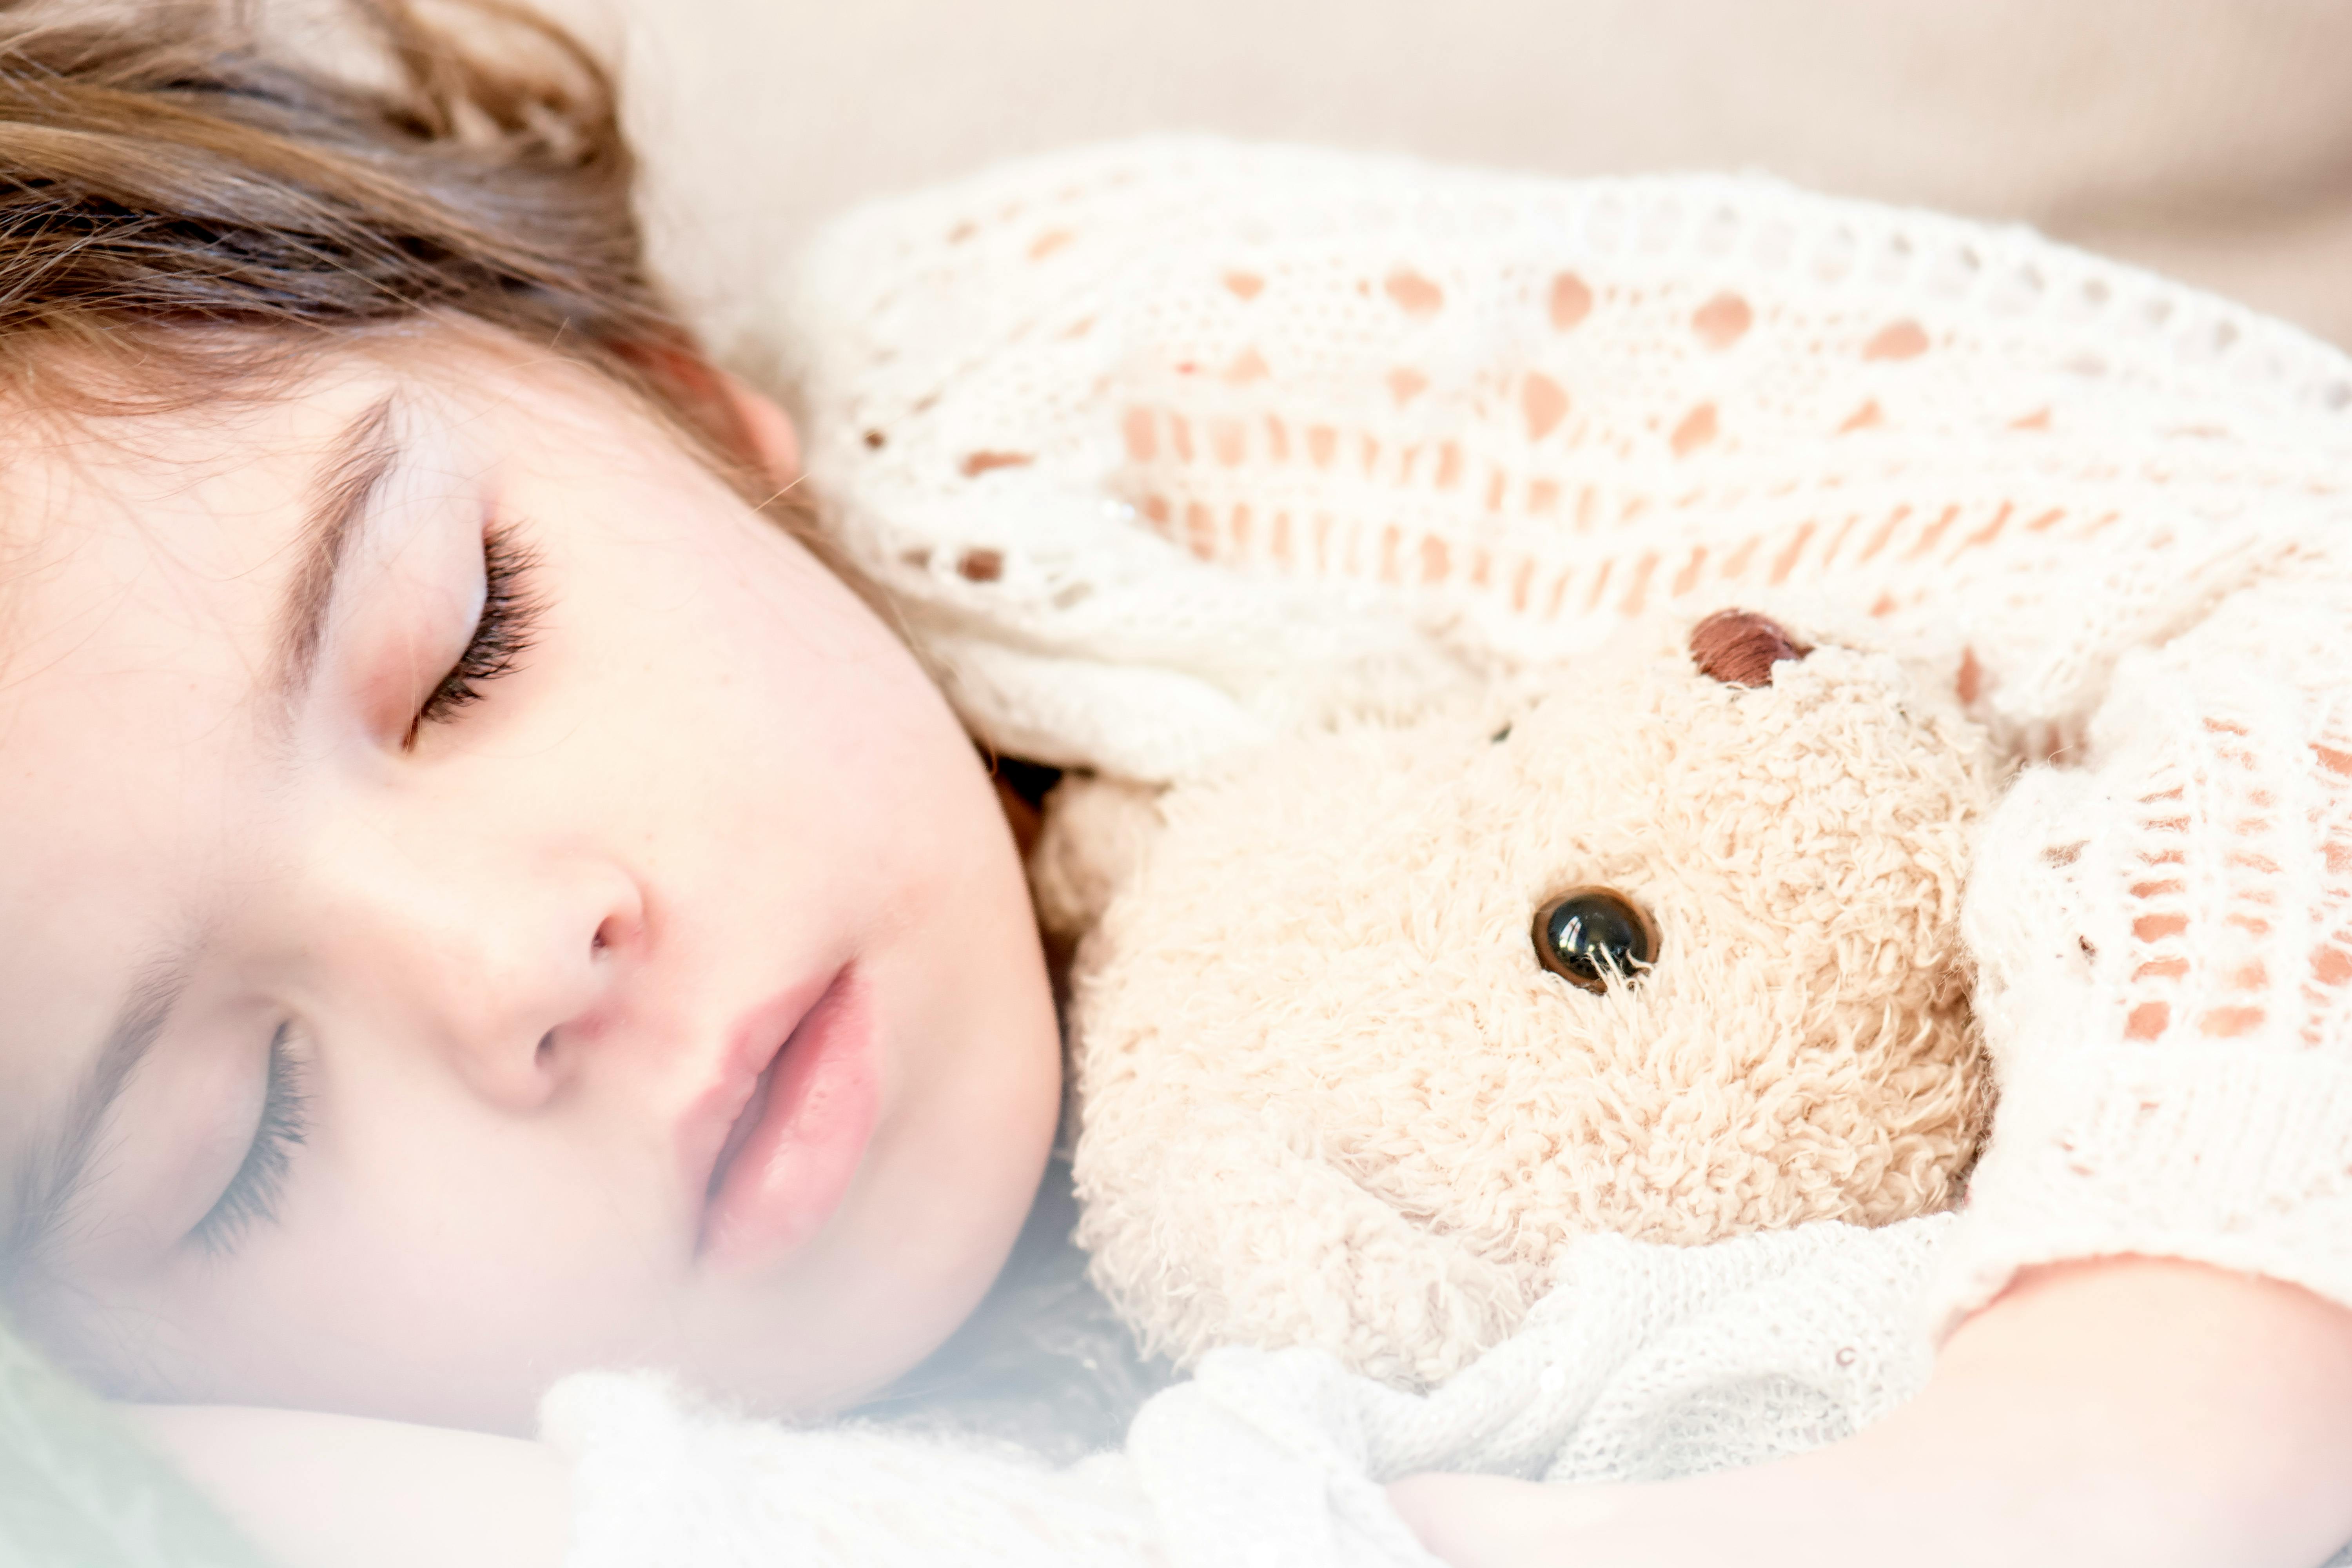 A sleeping child | Source: Pexels